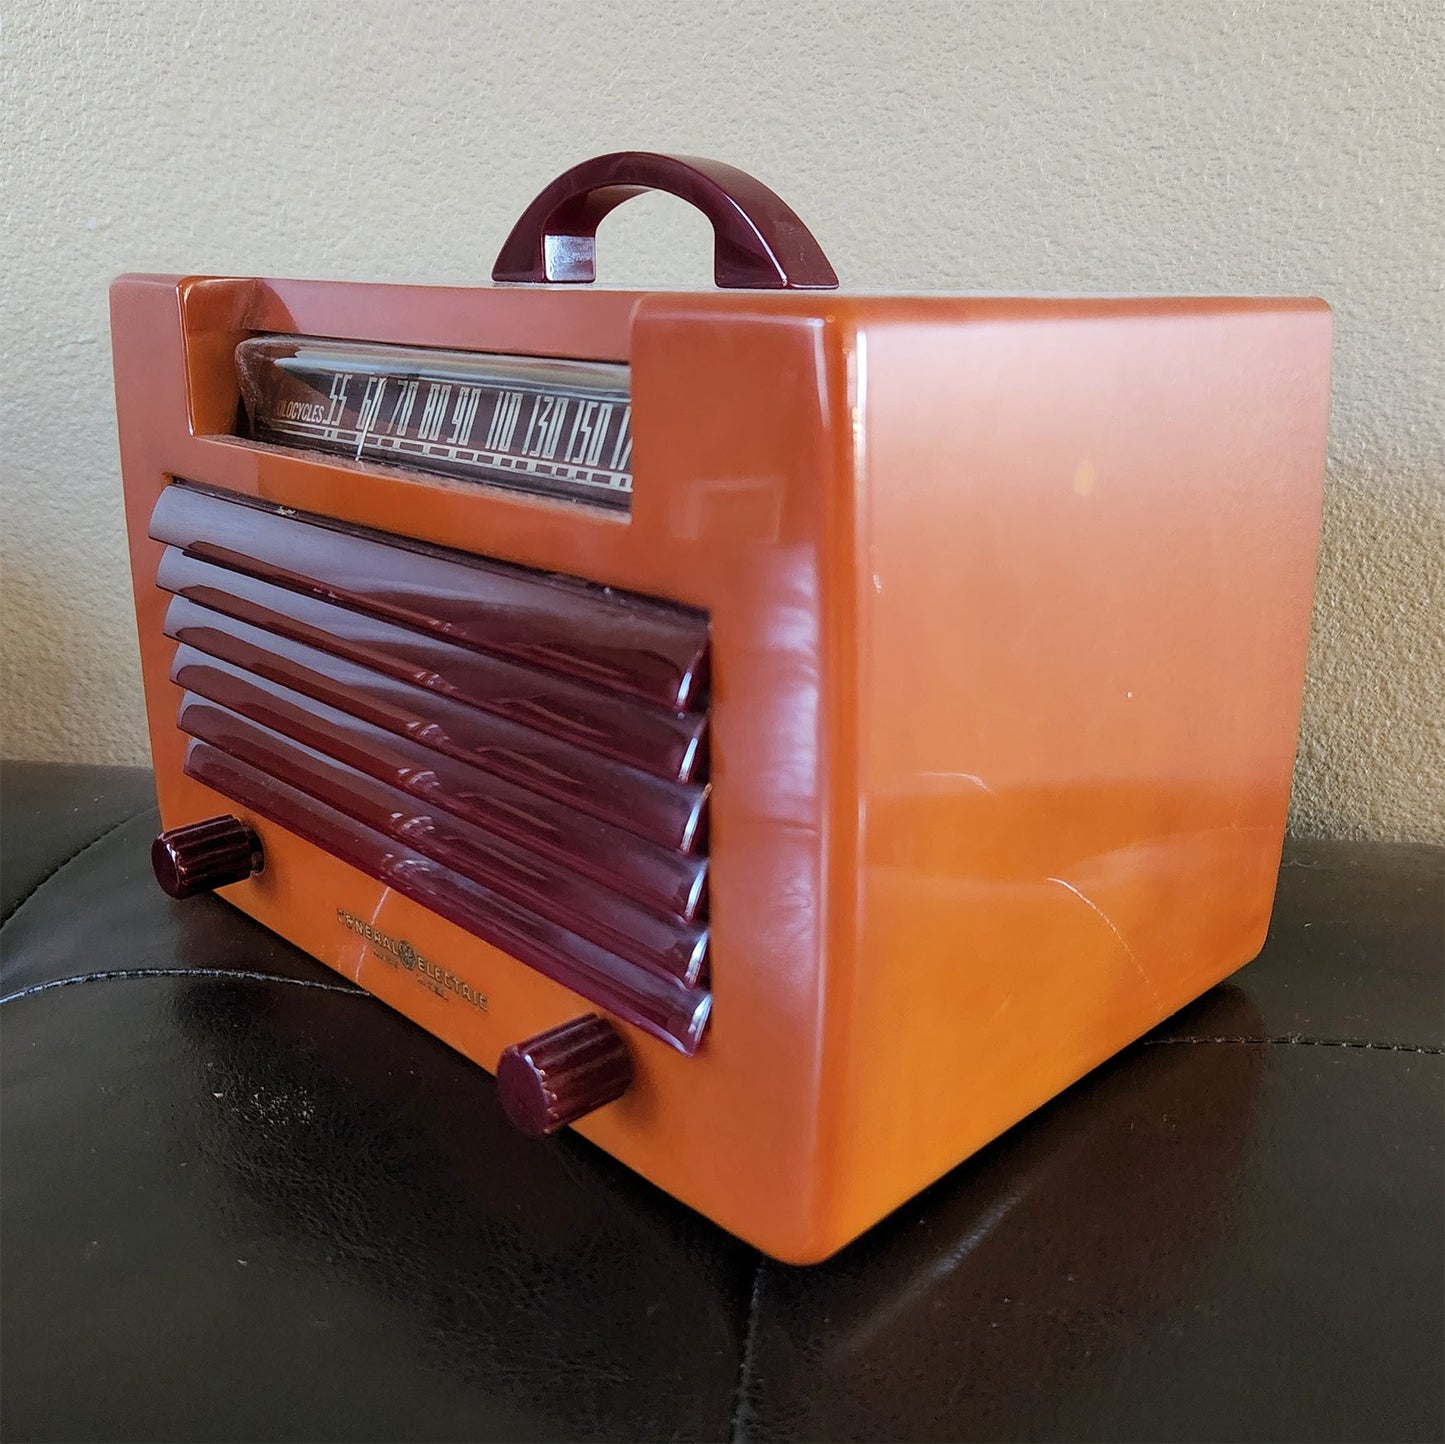 General Electric L570 Catalin Radio Butterscotch and Maroon